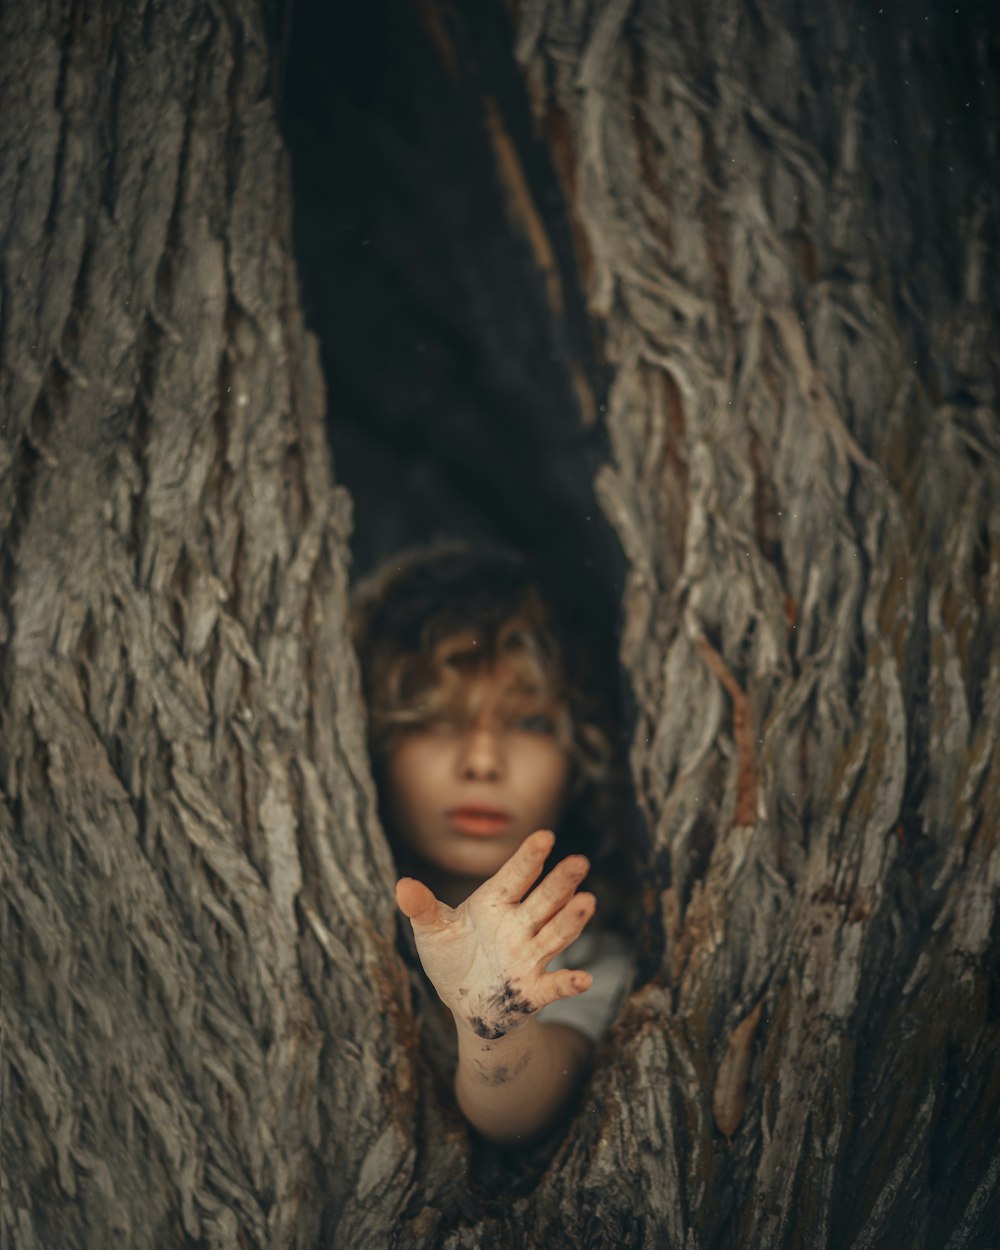 a person hiding behind a tree trunk